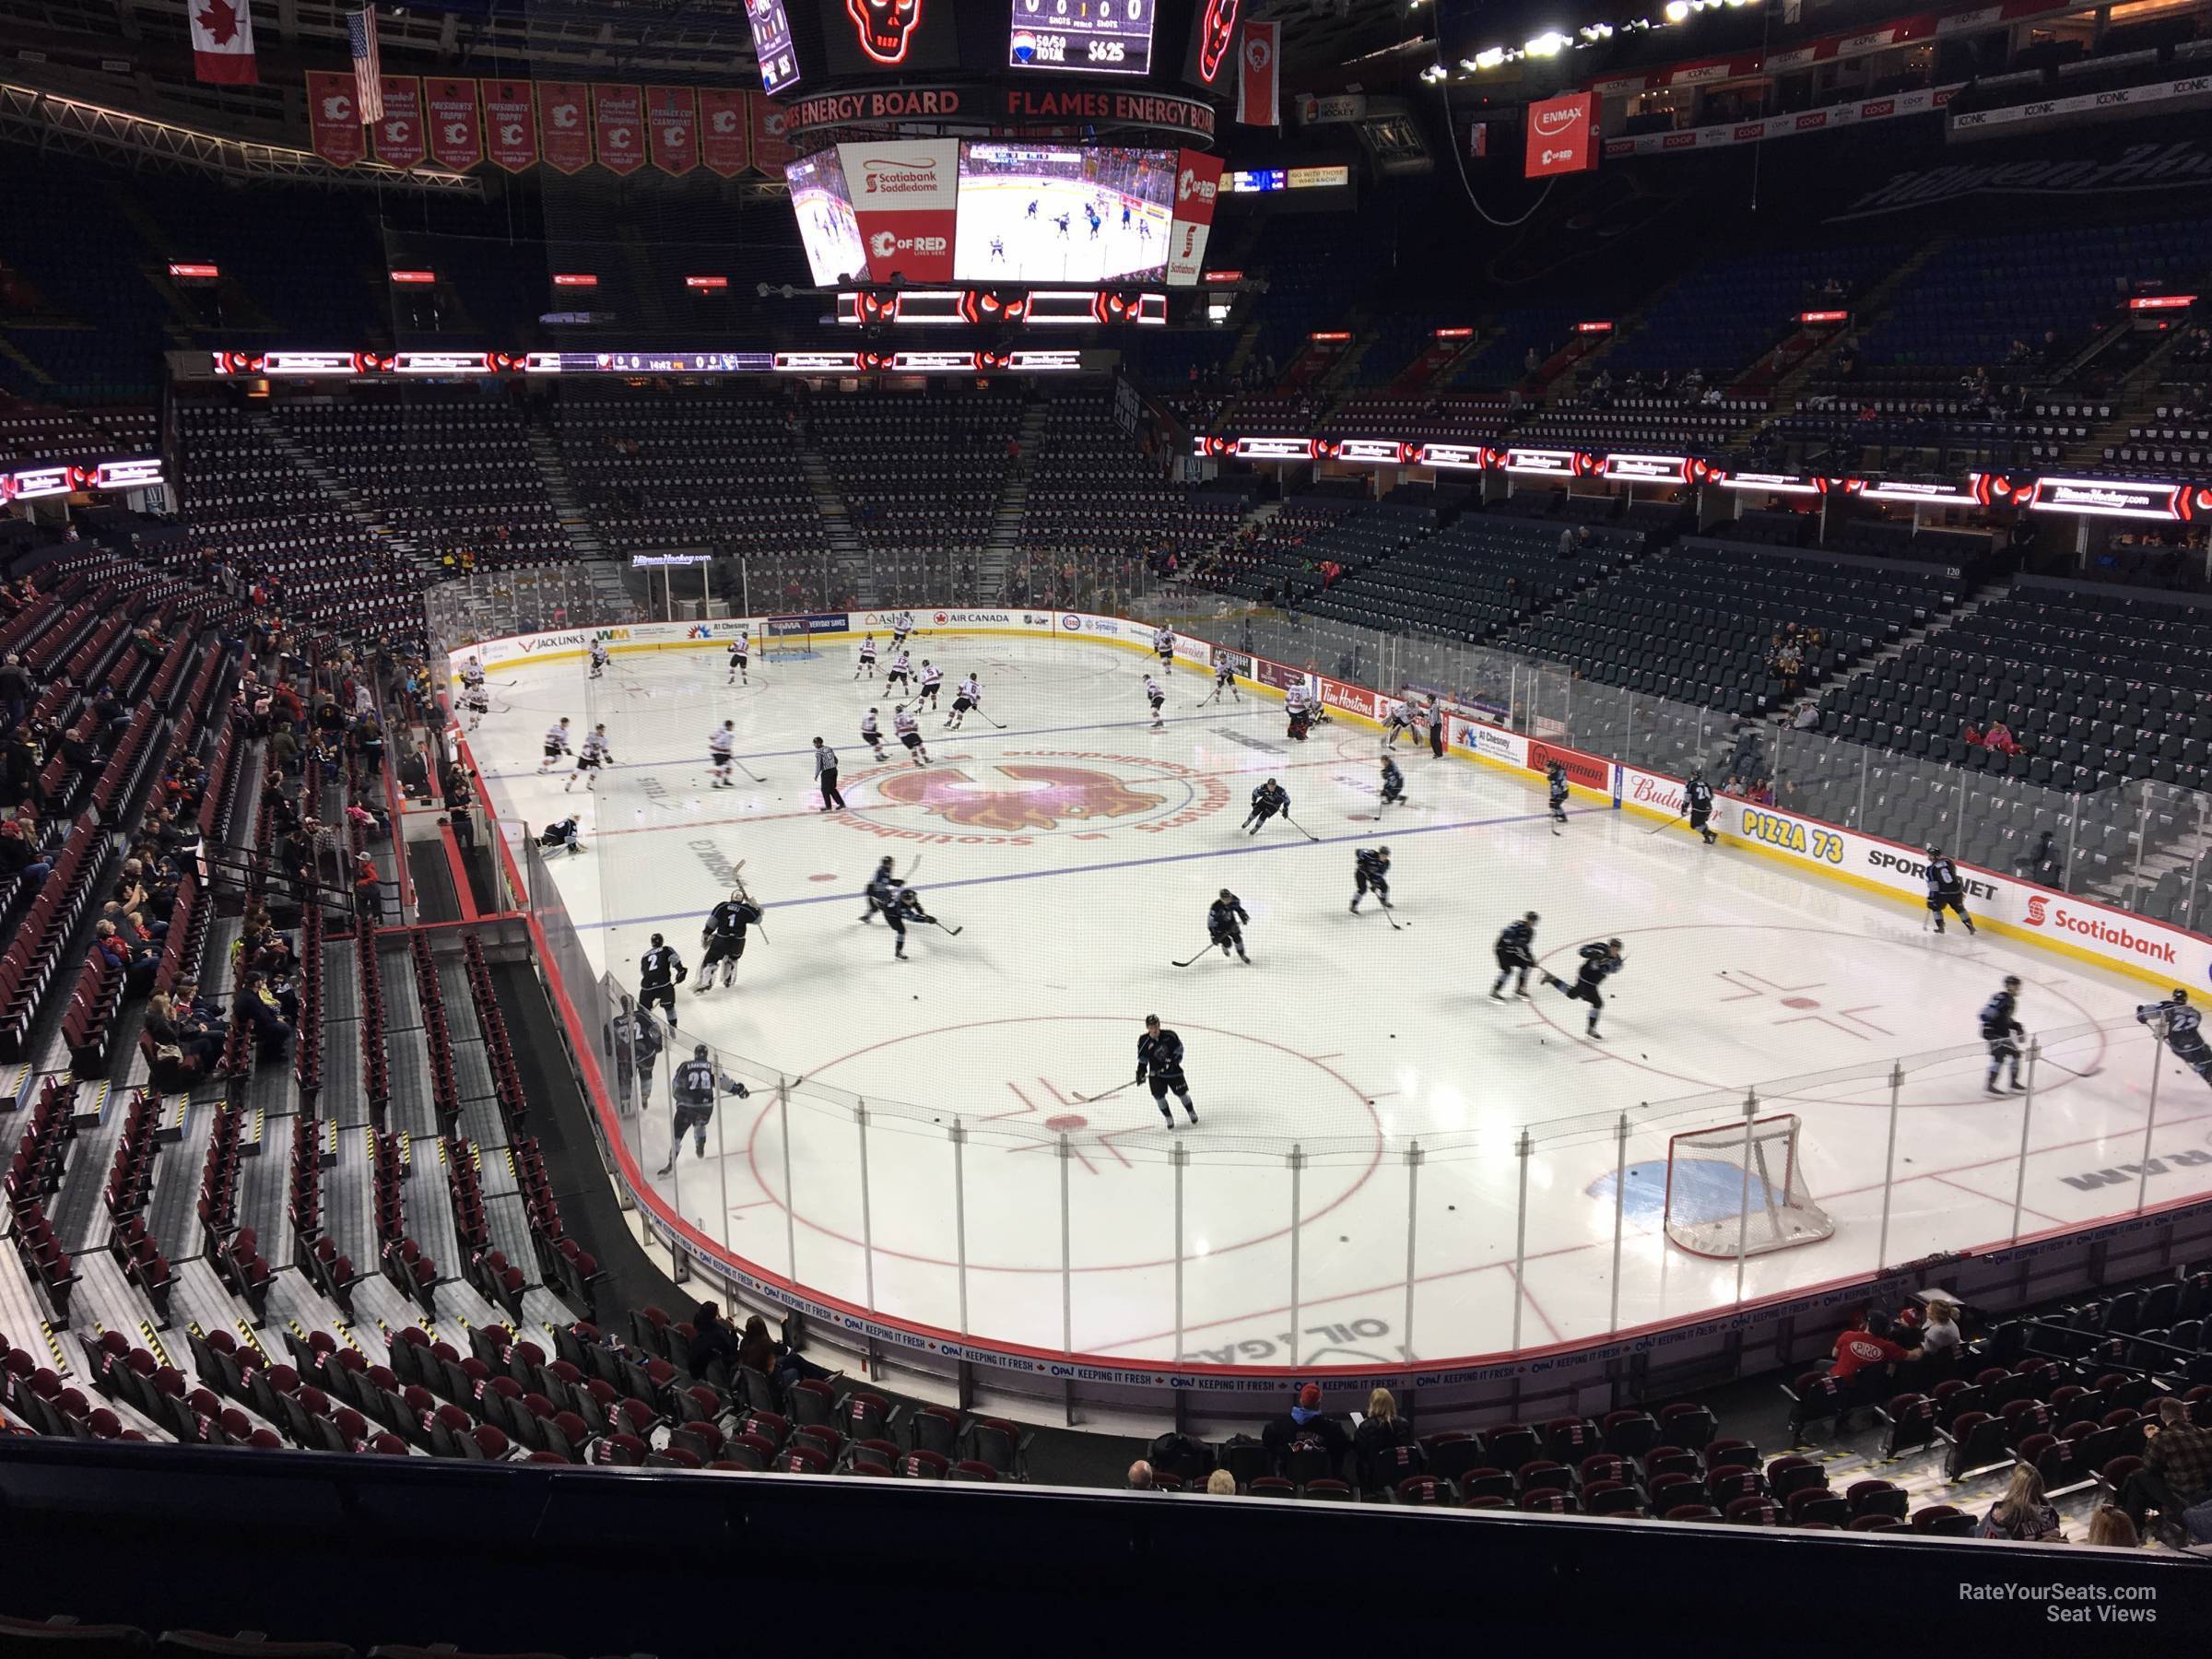 section 218, row 5 seat view  for hockey - scotiabank saddledome